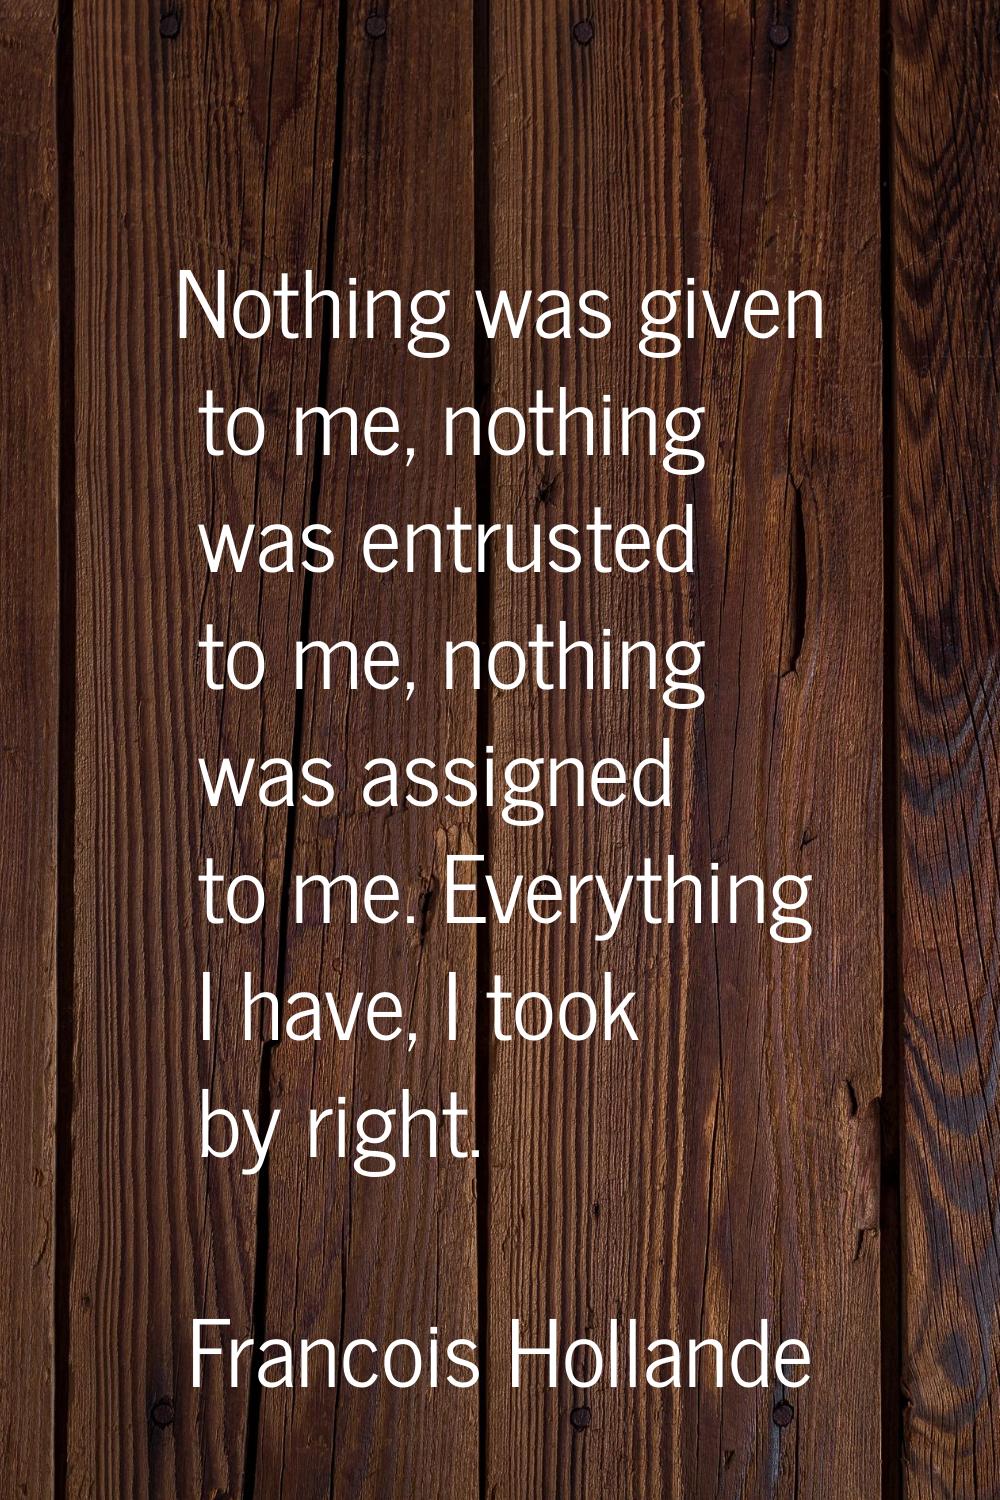 Nothing was given to me, nothing was entrusted to me, nothing was assigned to me. Everything I have